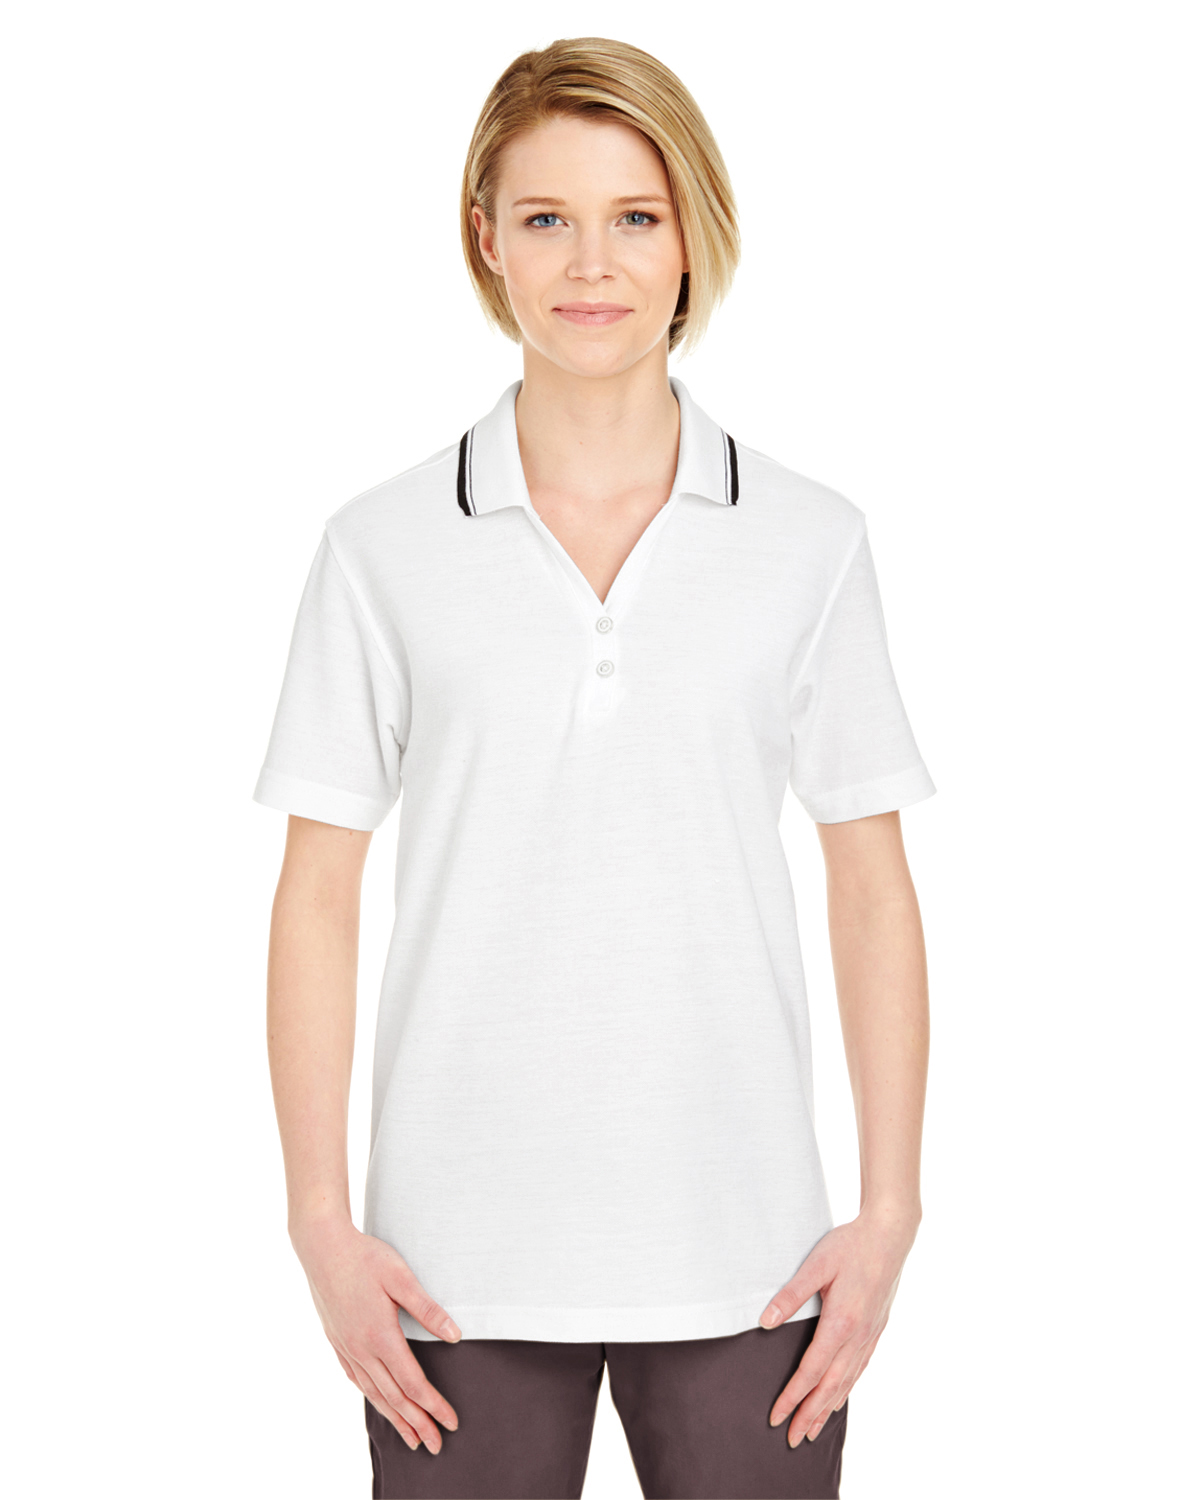 UltraClub Ladies\' Short-Sleeve Whisper Piqué Polo with Tipped Collar